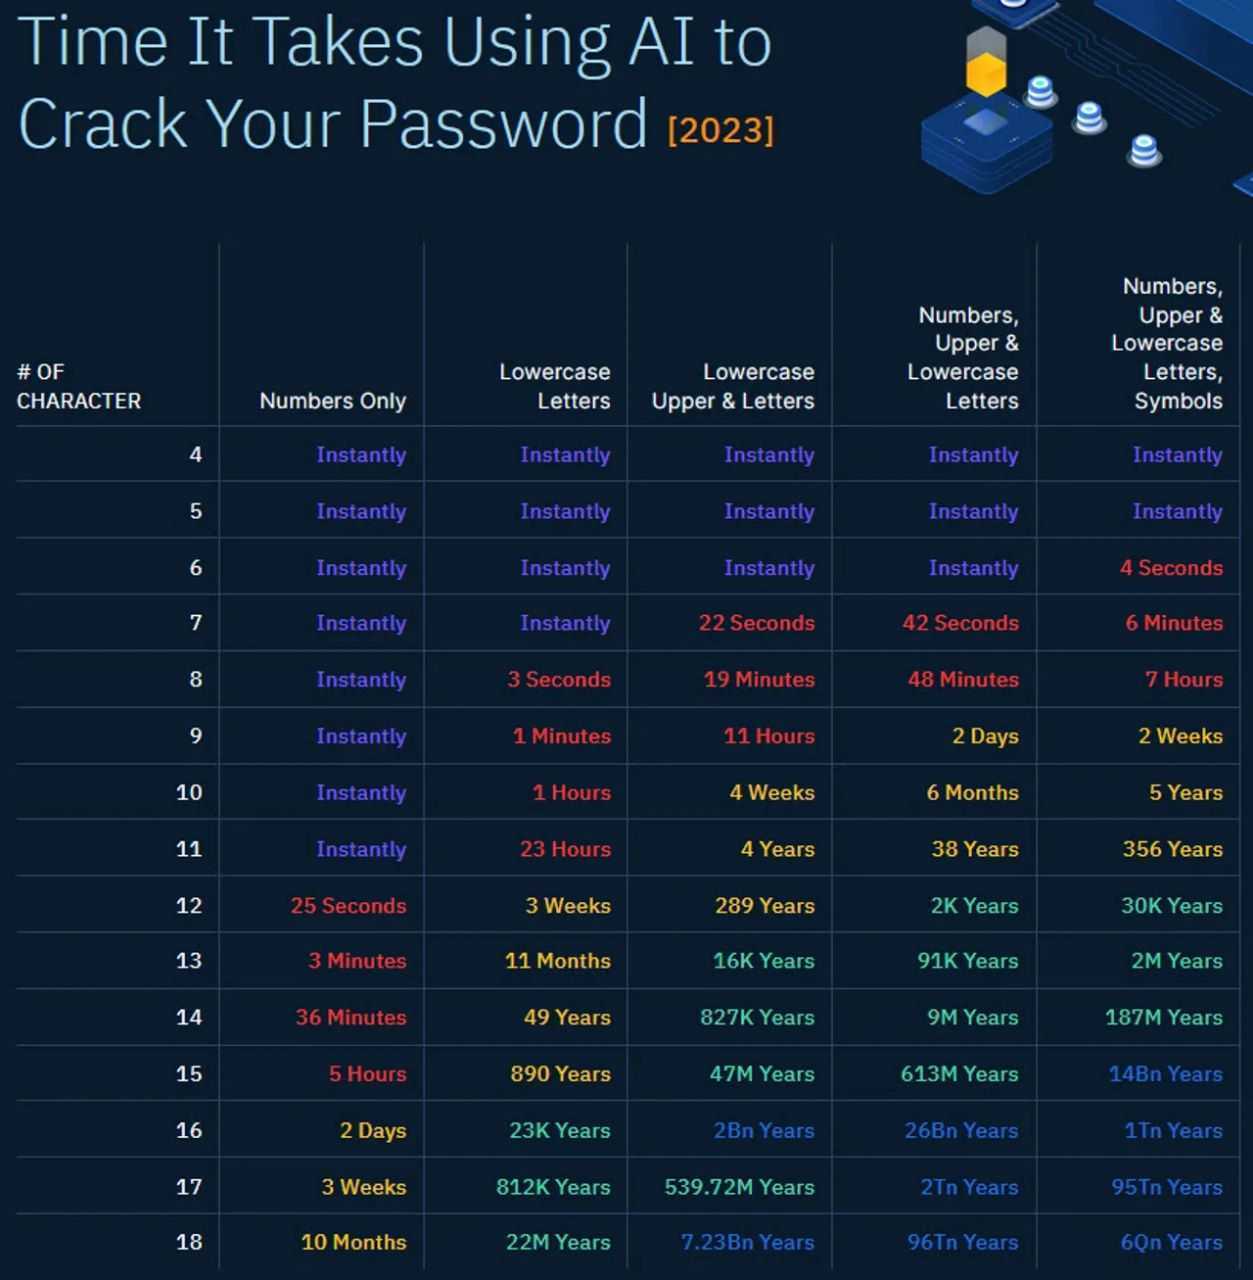 Chart detailing time AI spends cracking passwords.